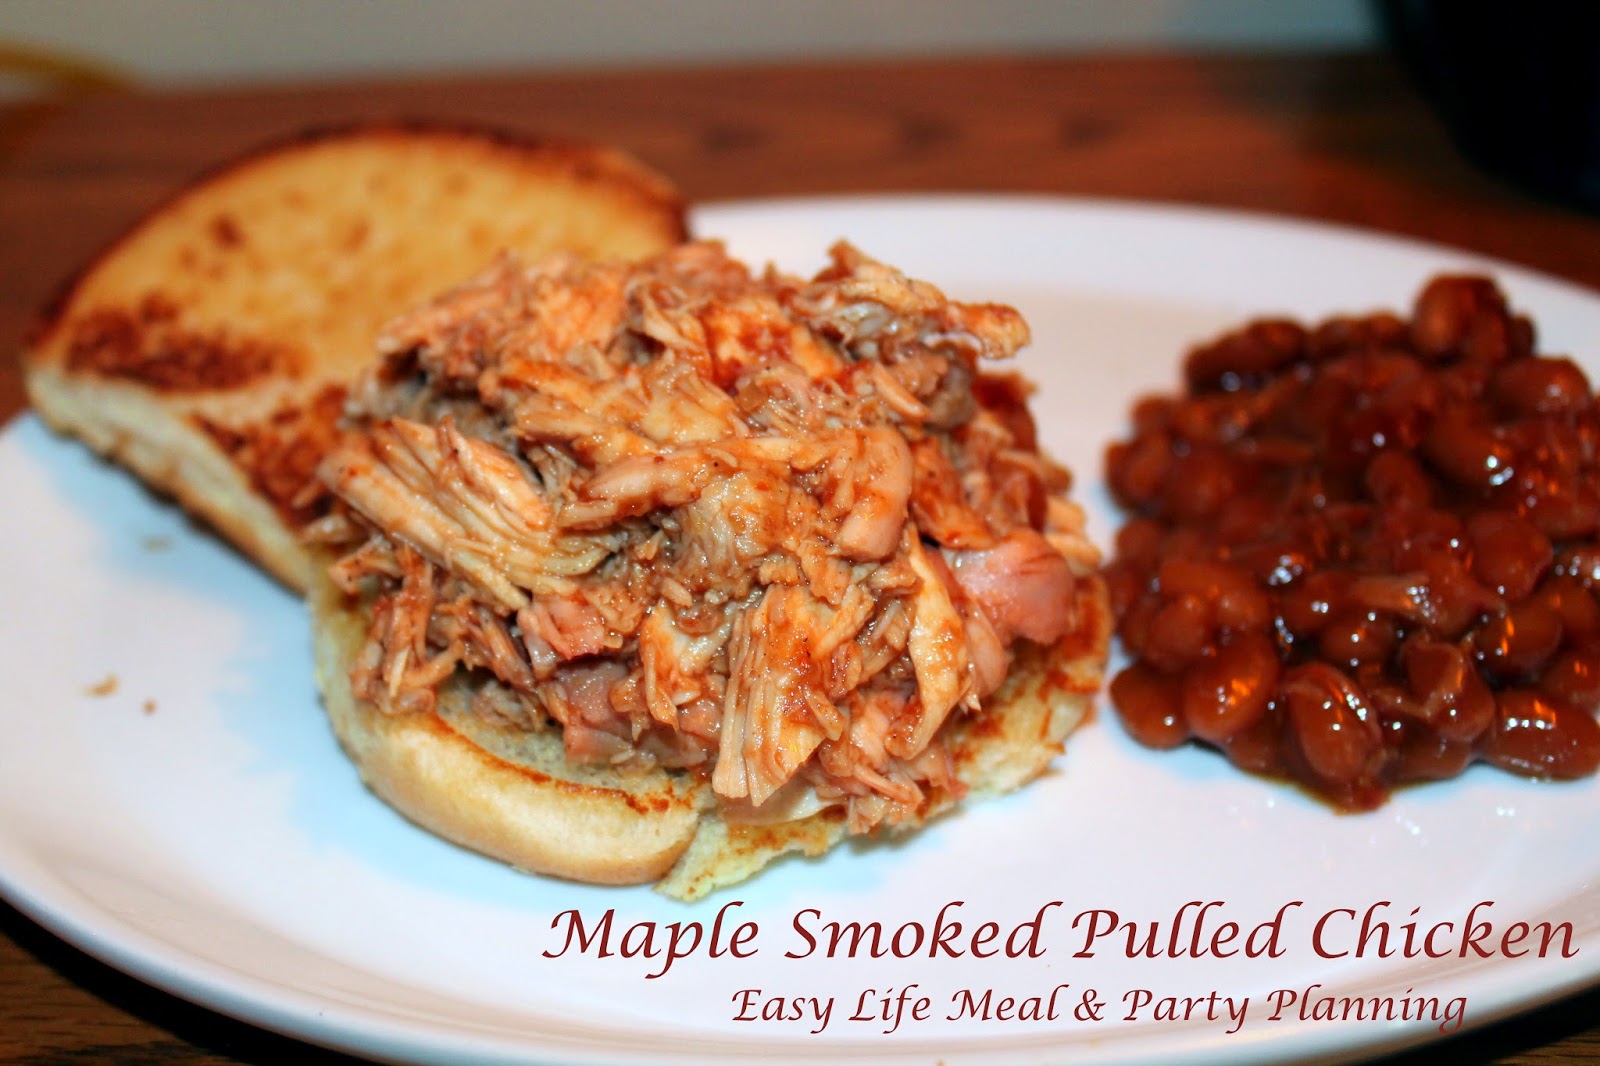 Maple Smoked Pulled Chicken - Easy Life Meal & Party Planning - Maple, hone & barbecue sauce flavors melded together into the juiciest chicken you will ever taste!